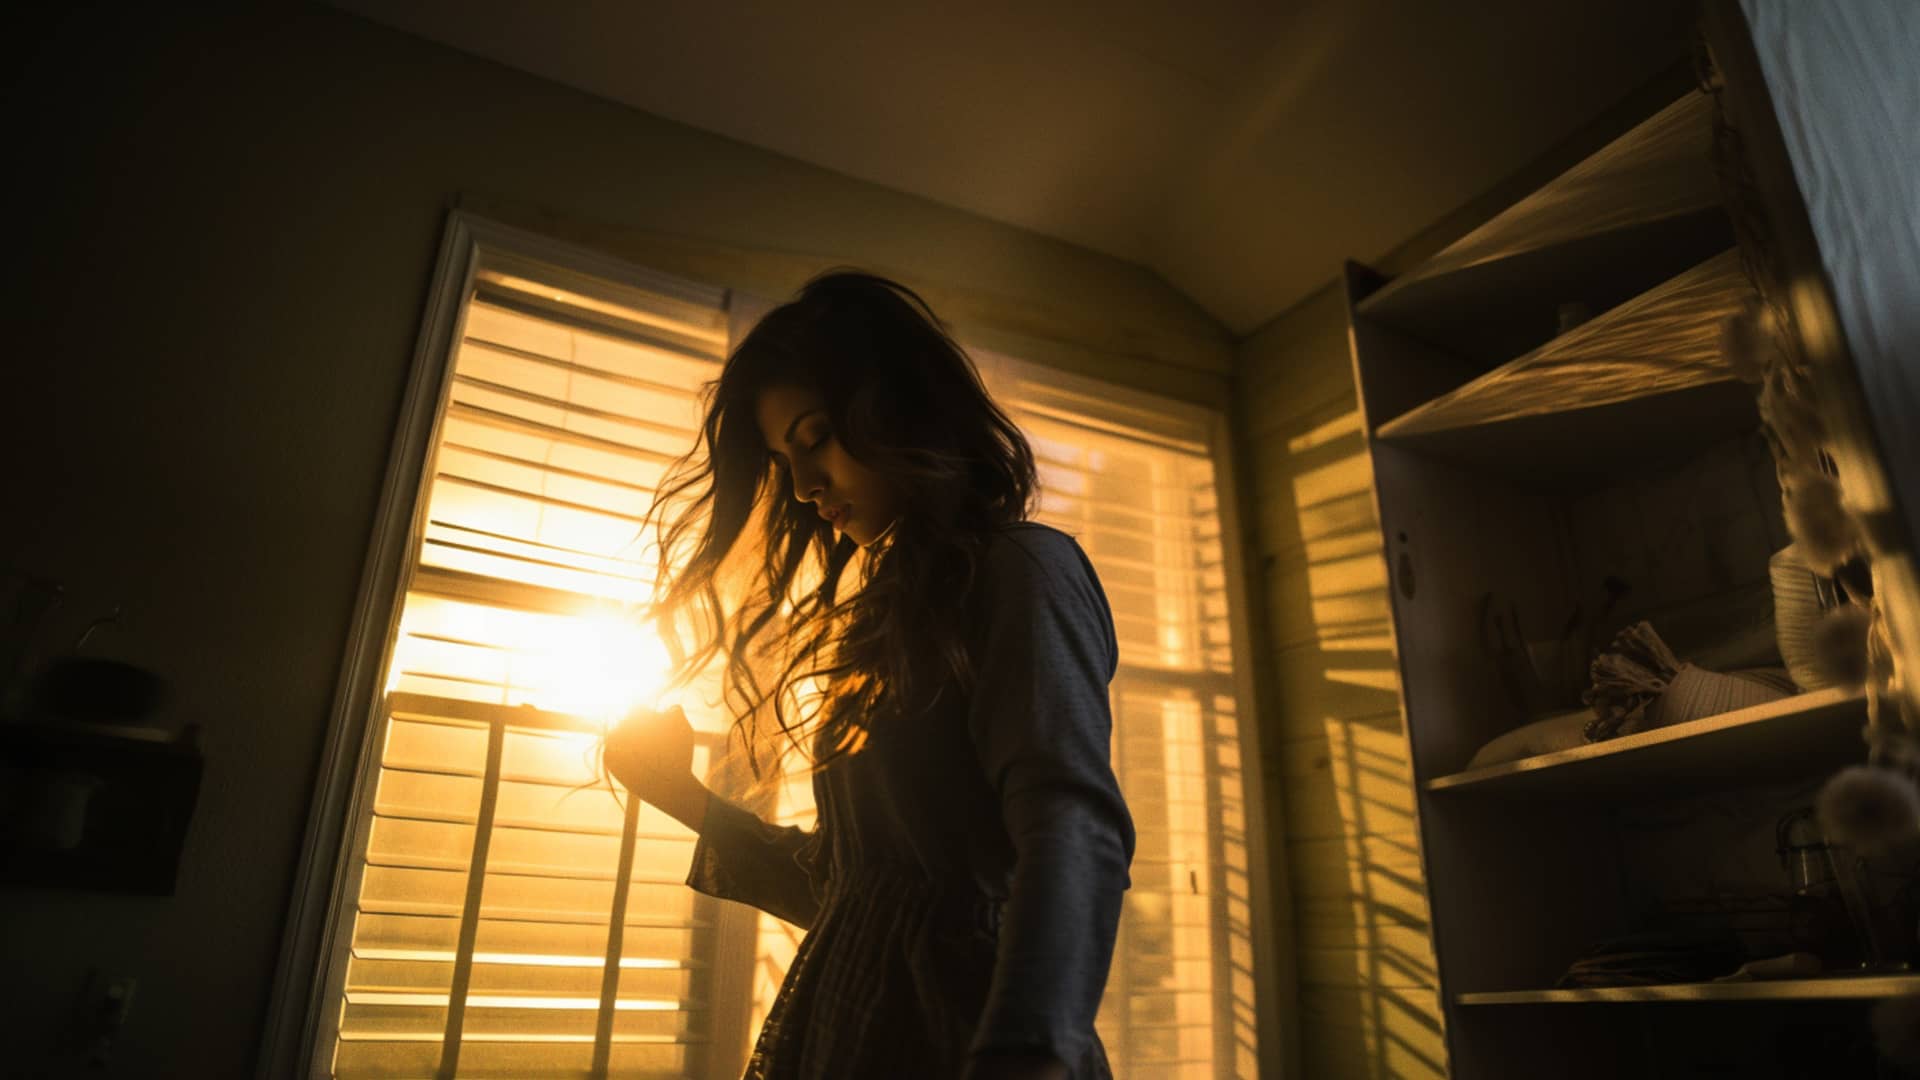 Woman with Long Black Hair in Room with Sunset Through Window